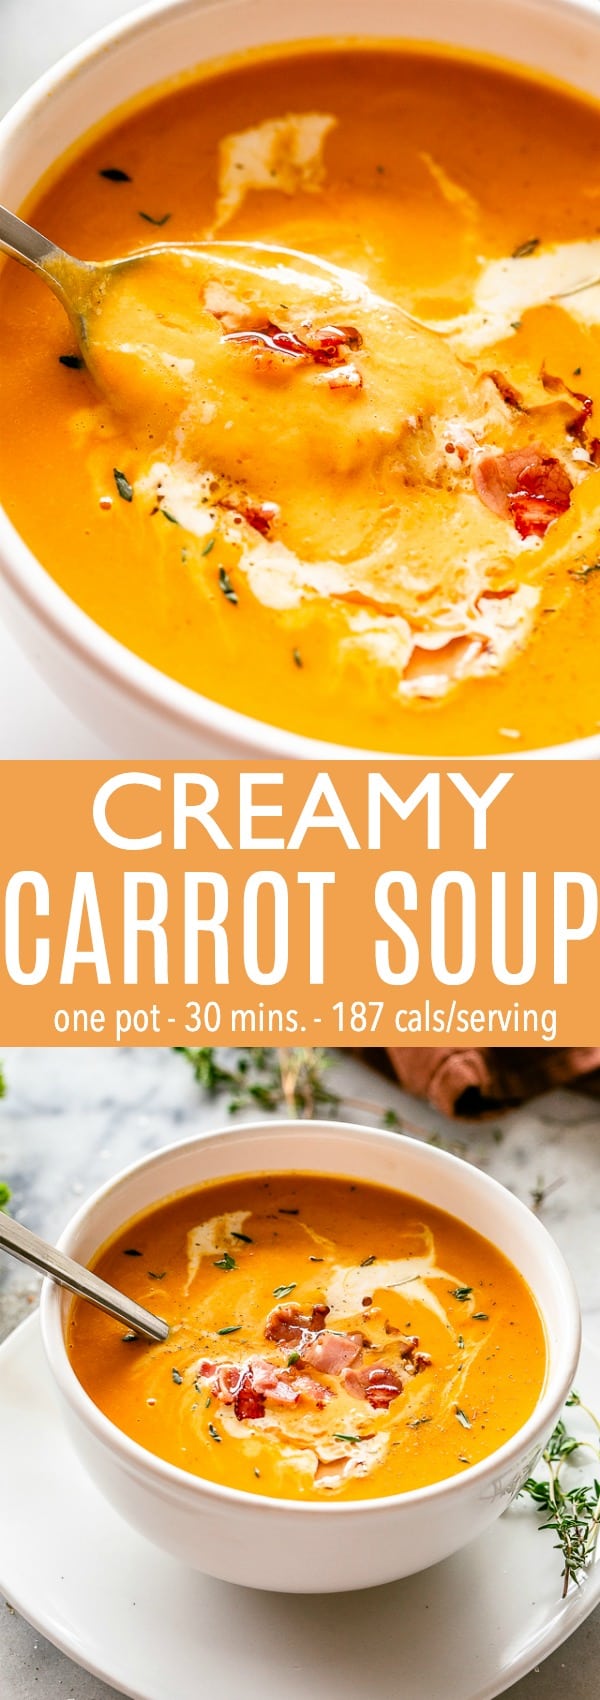 Easy, Healthy & Creamy Carrot Soup Recipe | Diethood